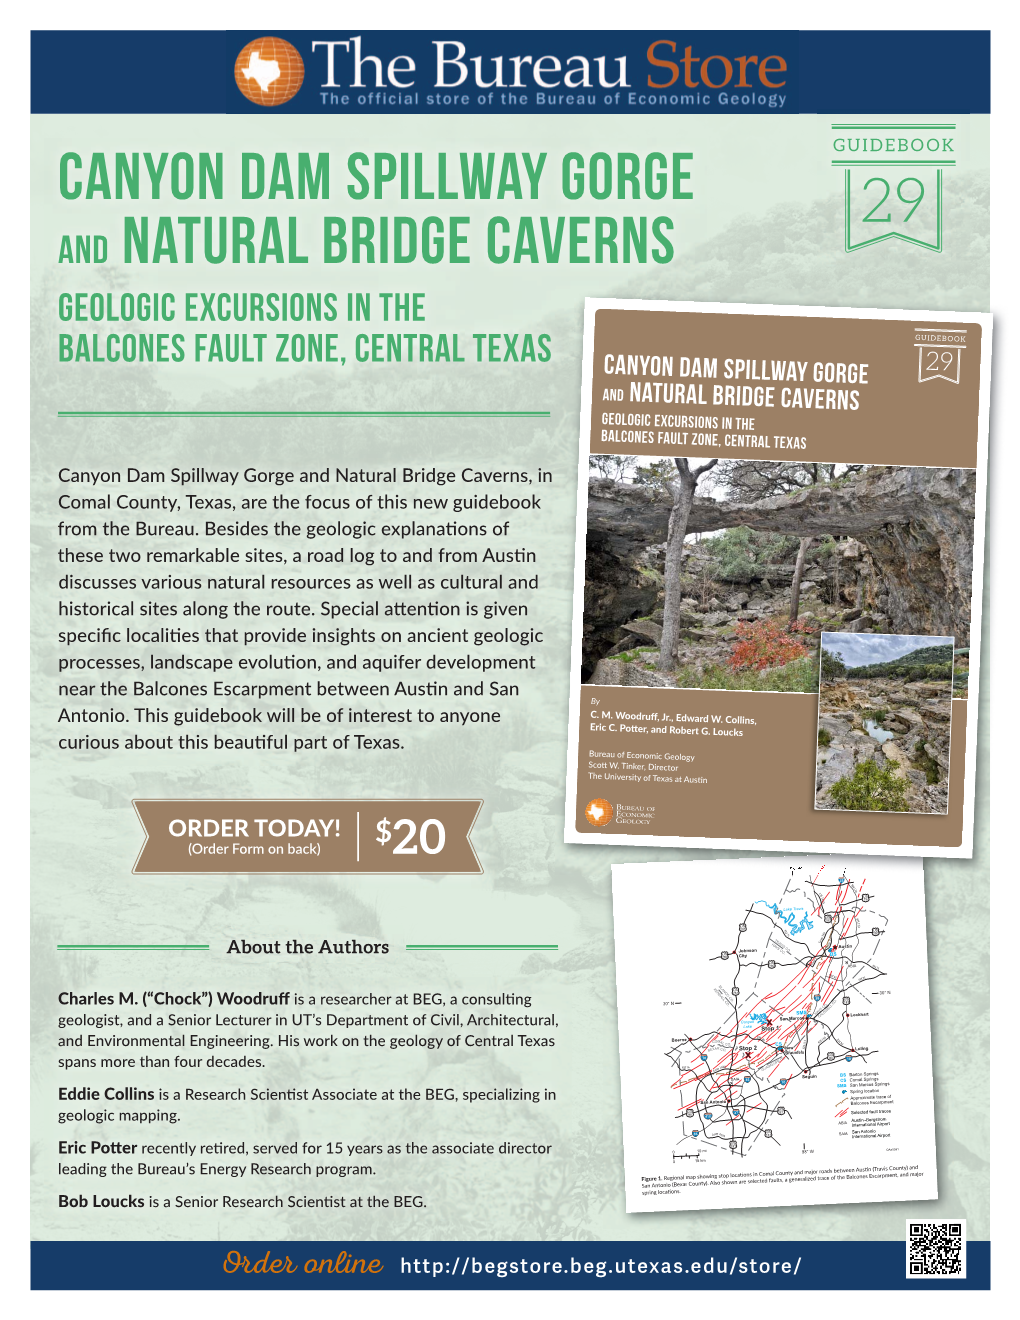 Canyon Dam Spillway Gorge and Natural Bridge Caverns, in Comal County, Texas, Are the Focus of This New Guidebook from the Bureau